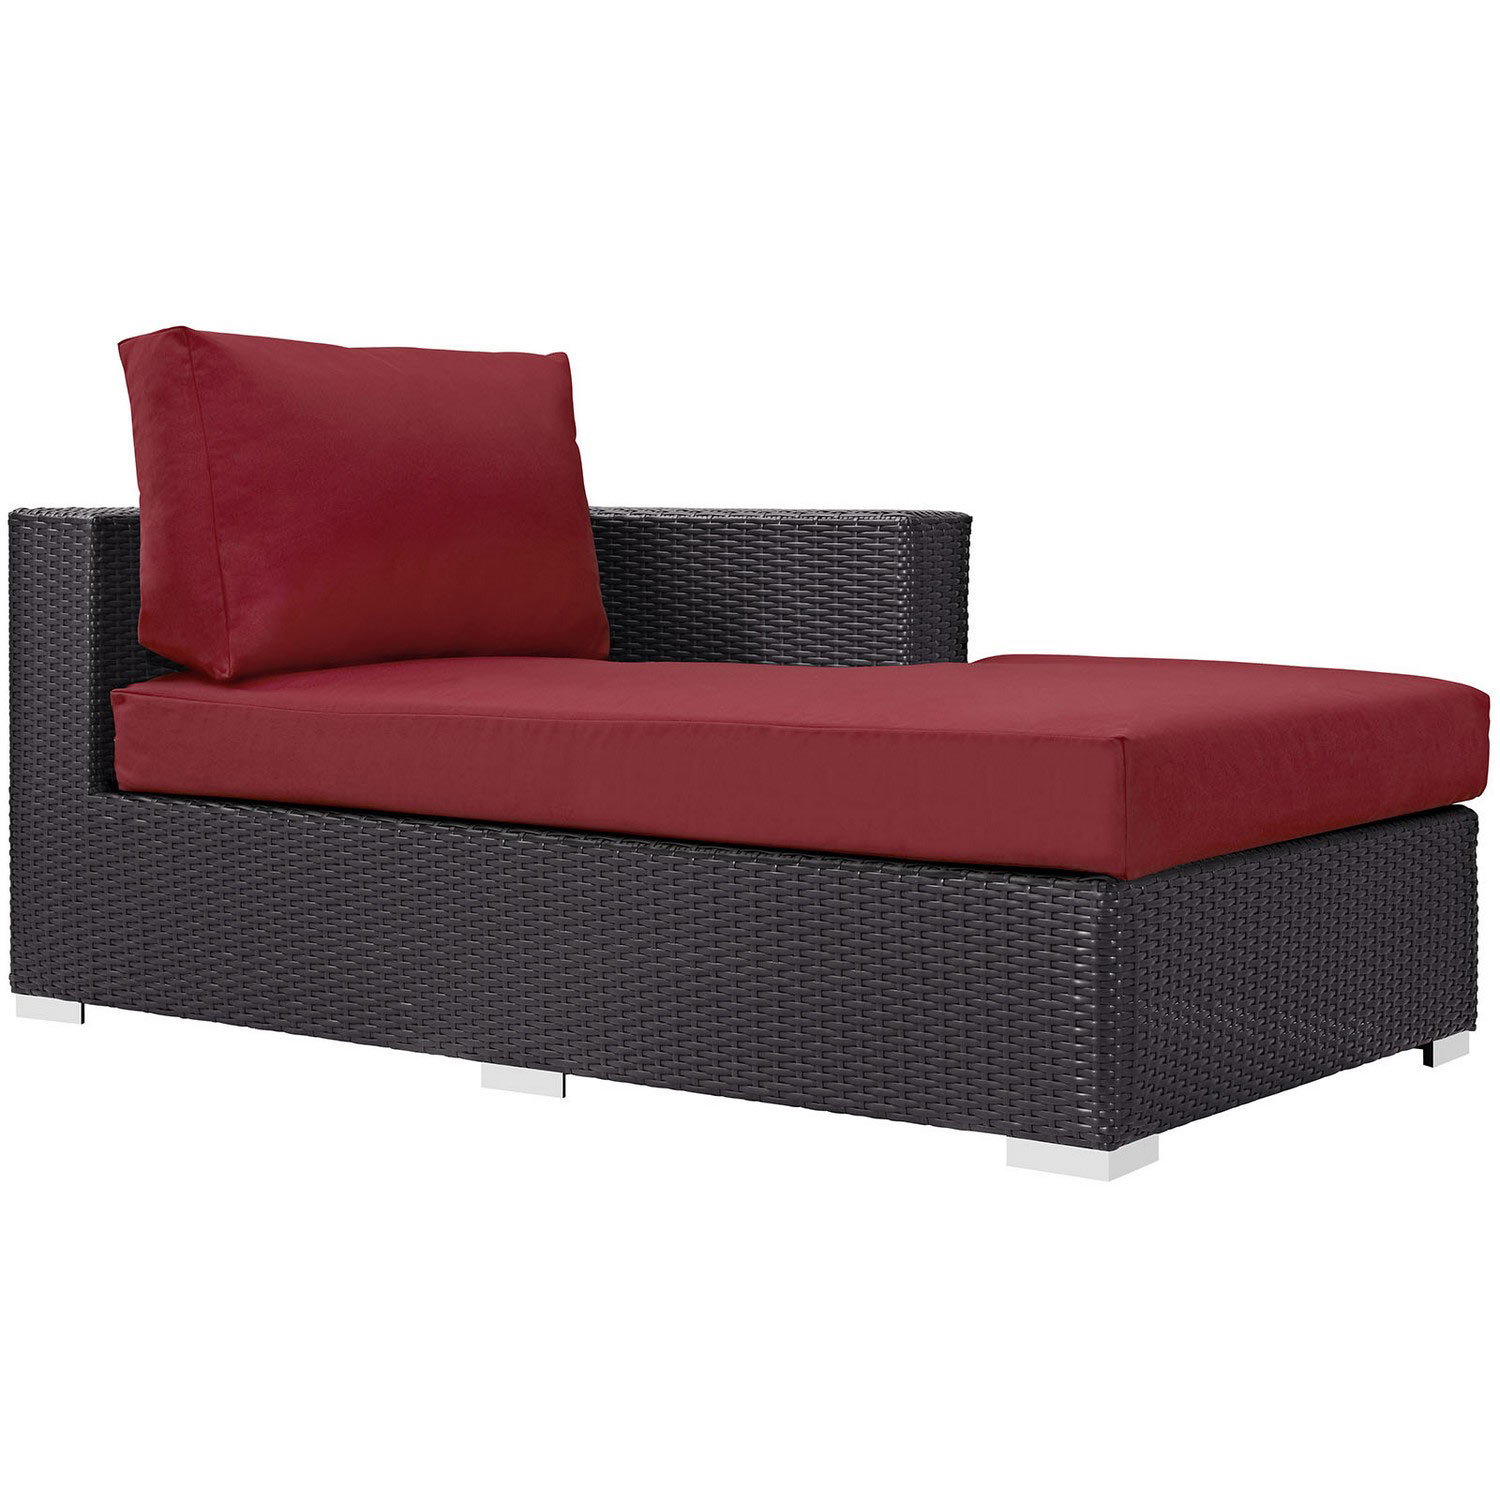 Modway Convene Outdoor Patio Fabric Right Arm Chaise - Espresso Red